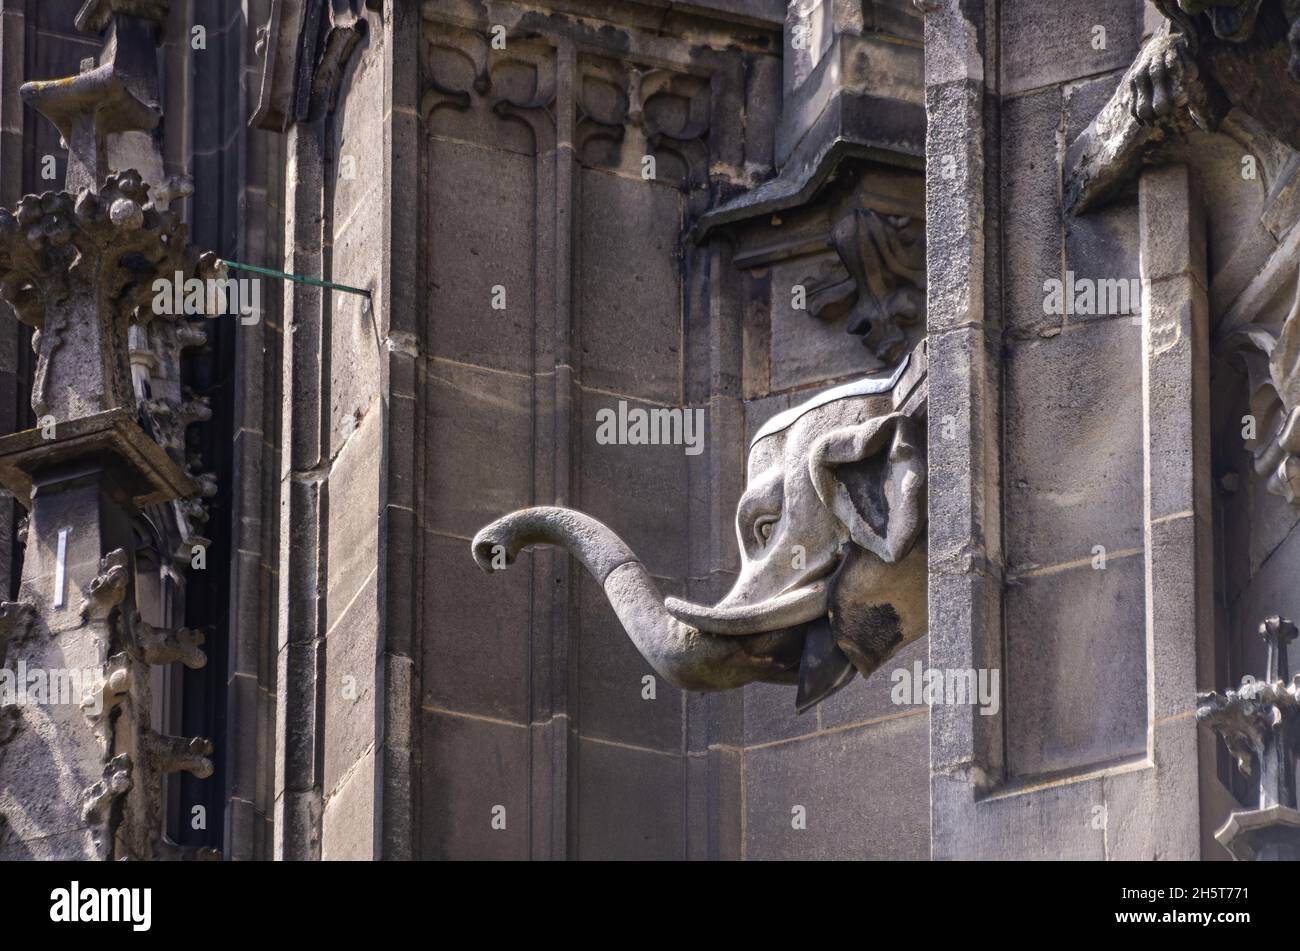 Ulm, Baden-Württemberg, Germany: Waterspout, executed as an elephant's head in stone, on the South side of the Minster. Stock Photo